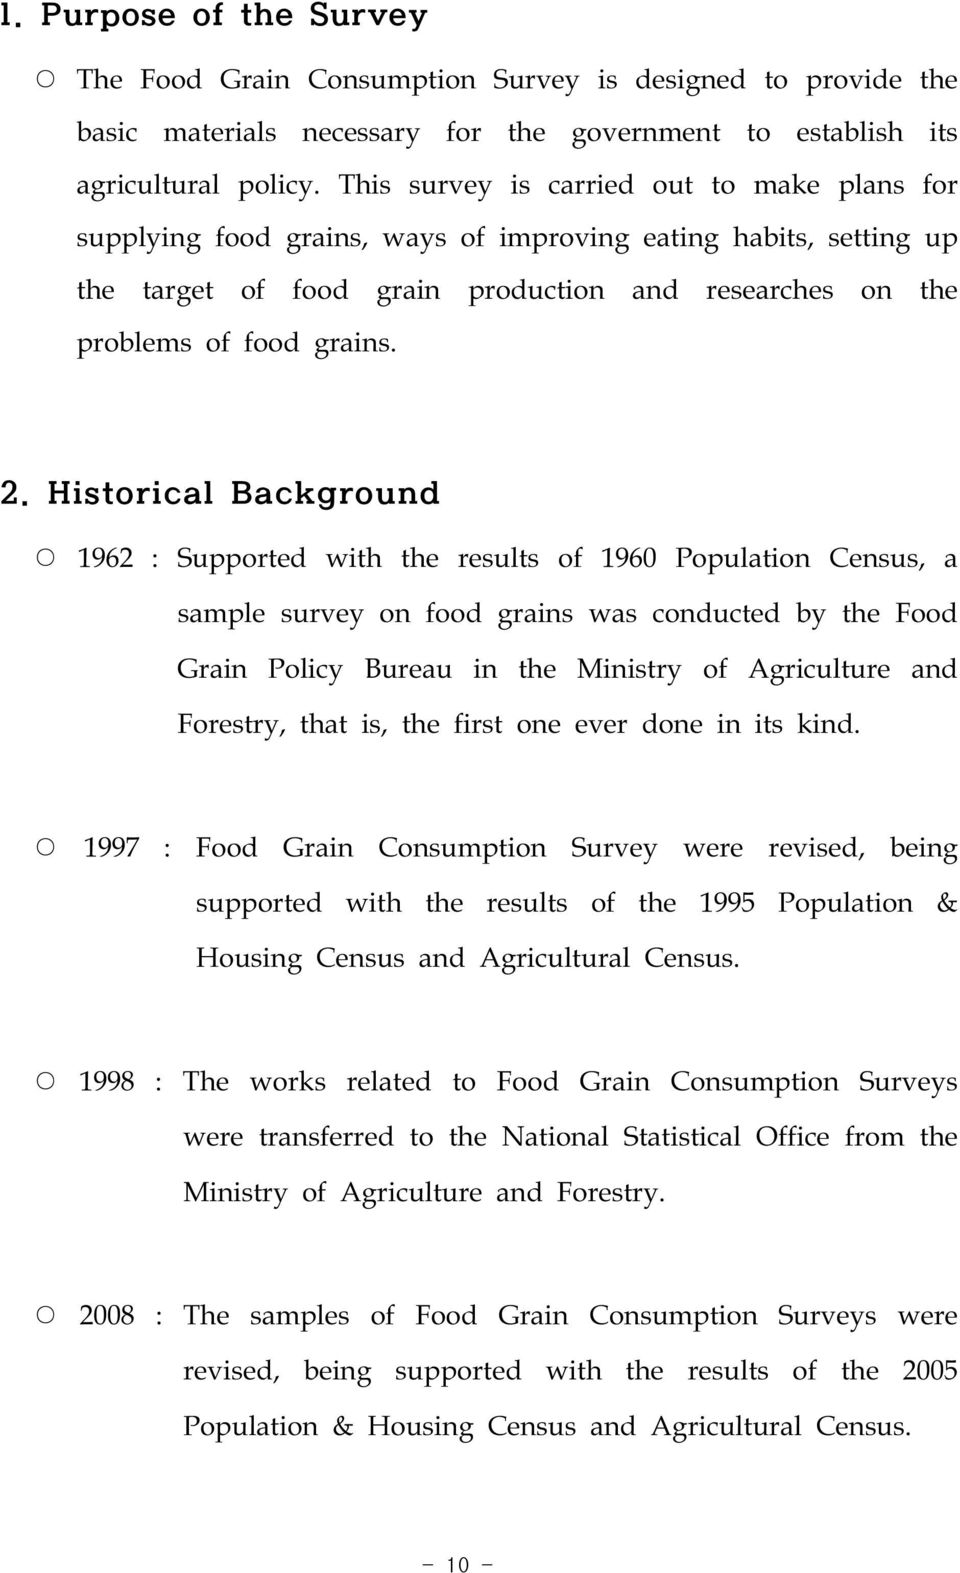 Historical Background 1962 : Supported with the results of 1960 Population Census, a sample survey on food grains was conducted by the Food Grain Policy Bureau in the Ministry of Agriculture and